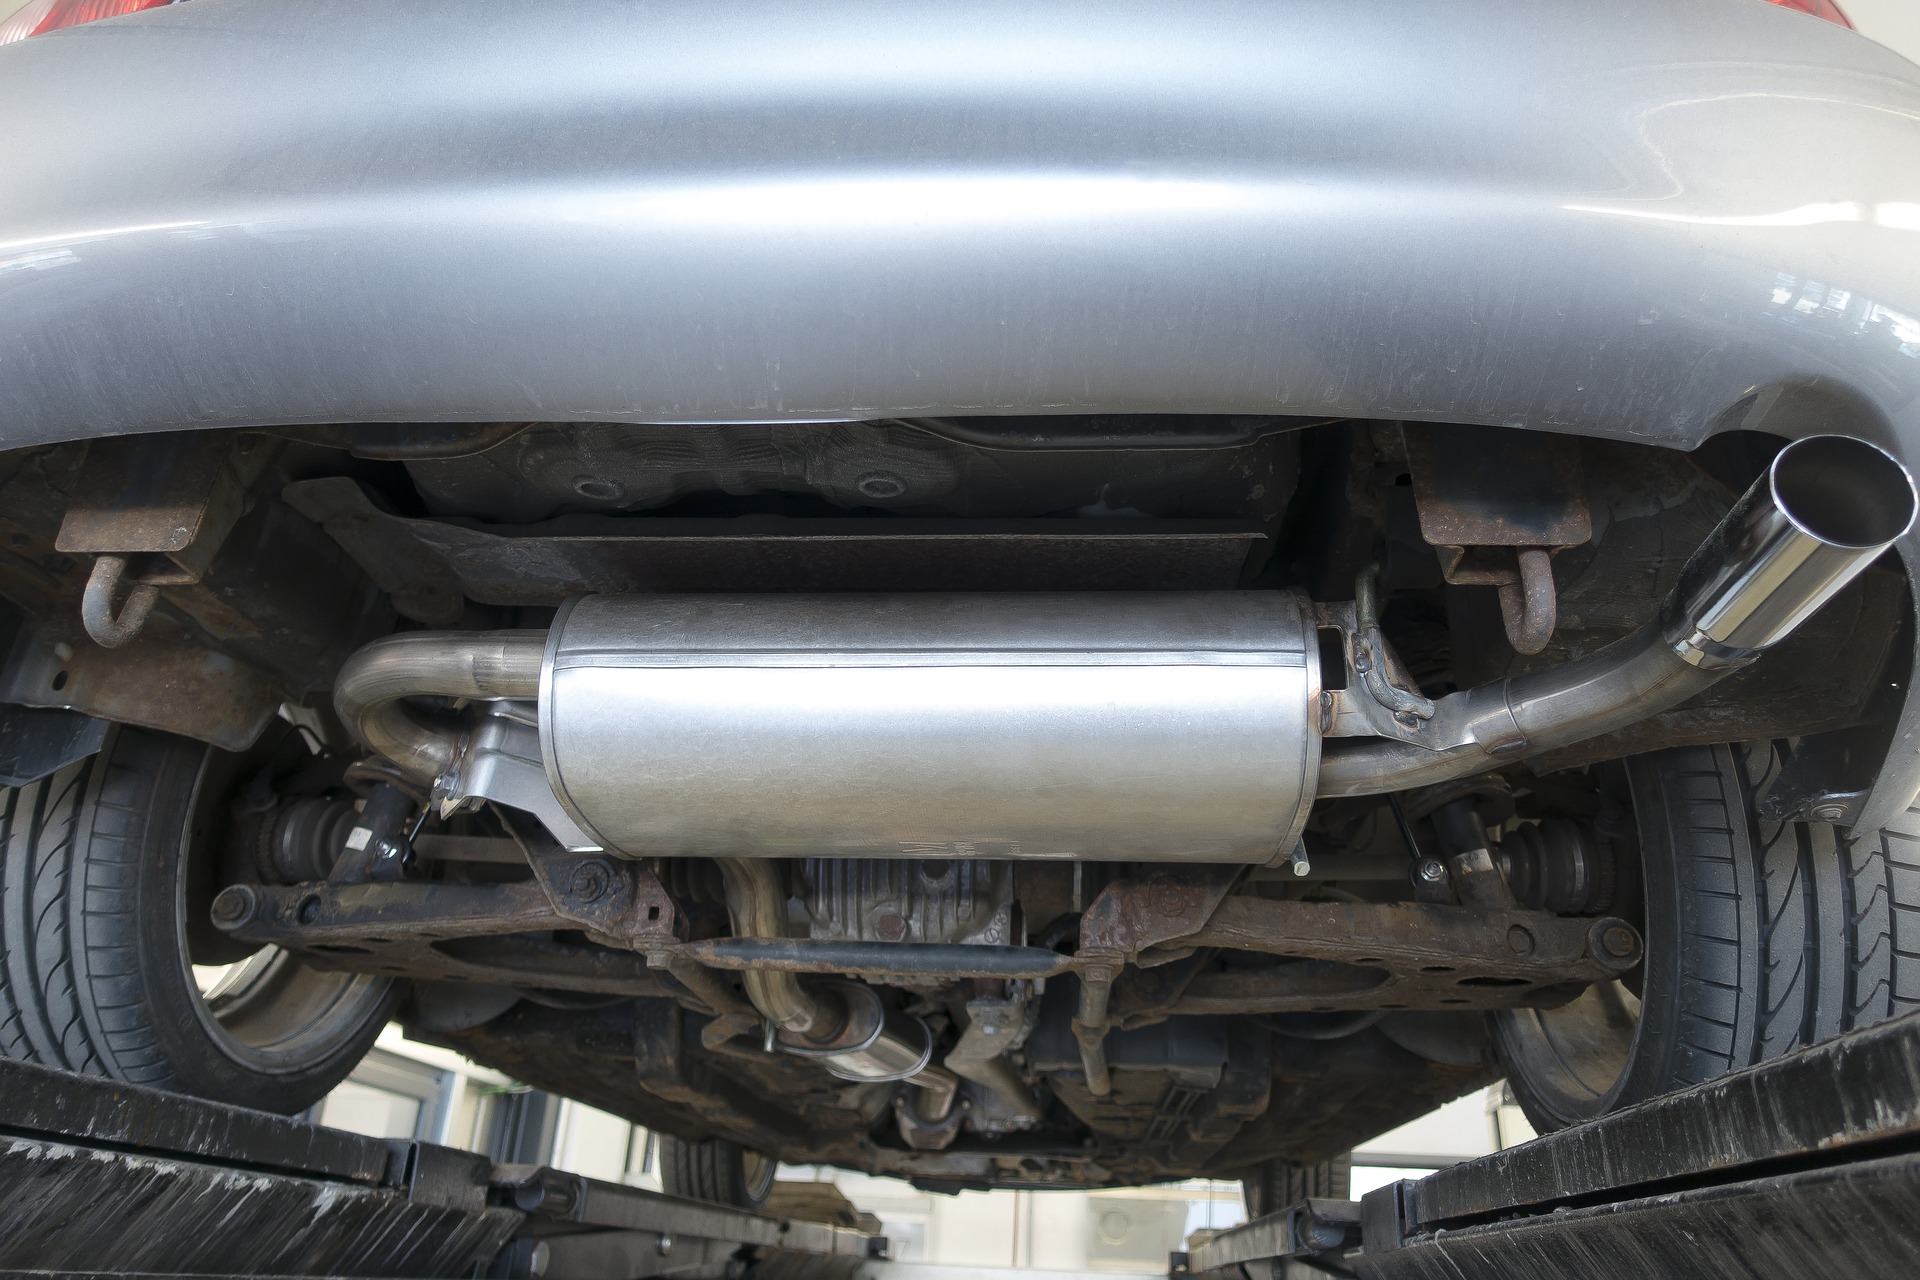 Exhaust system under a car.